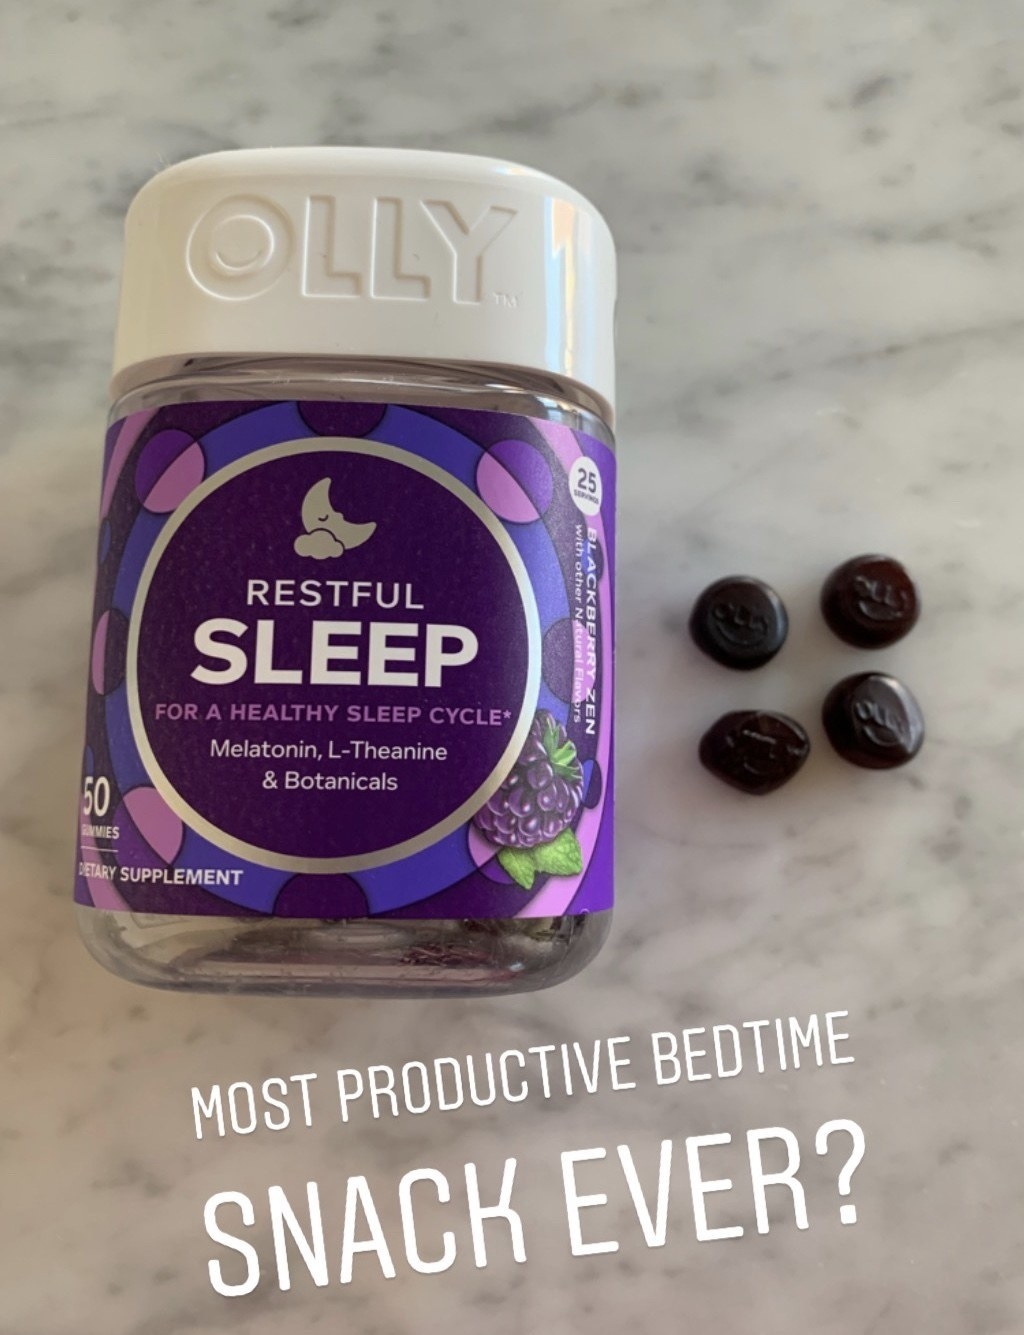 the container of olly sleep gummies with text added by a BuzzFeed editor that says &quot;most productive bedtime snack ever?&quot;